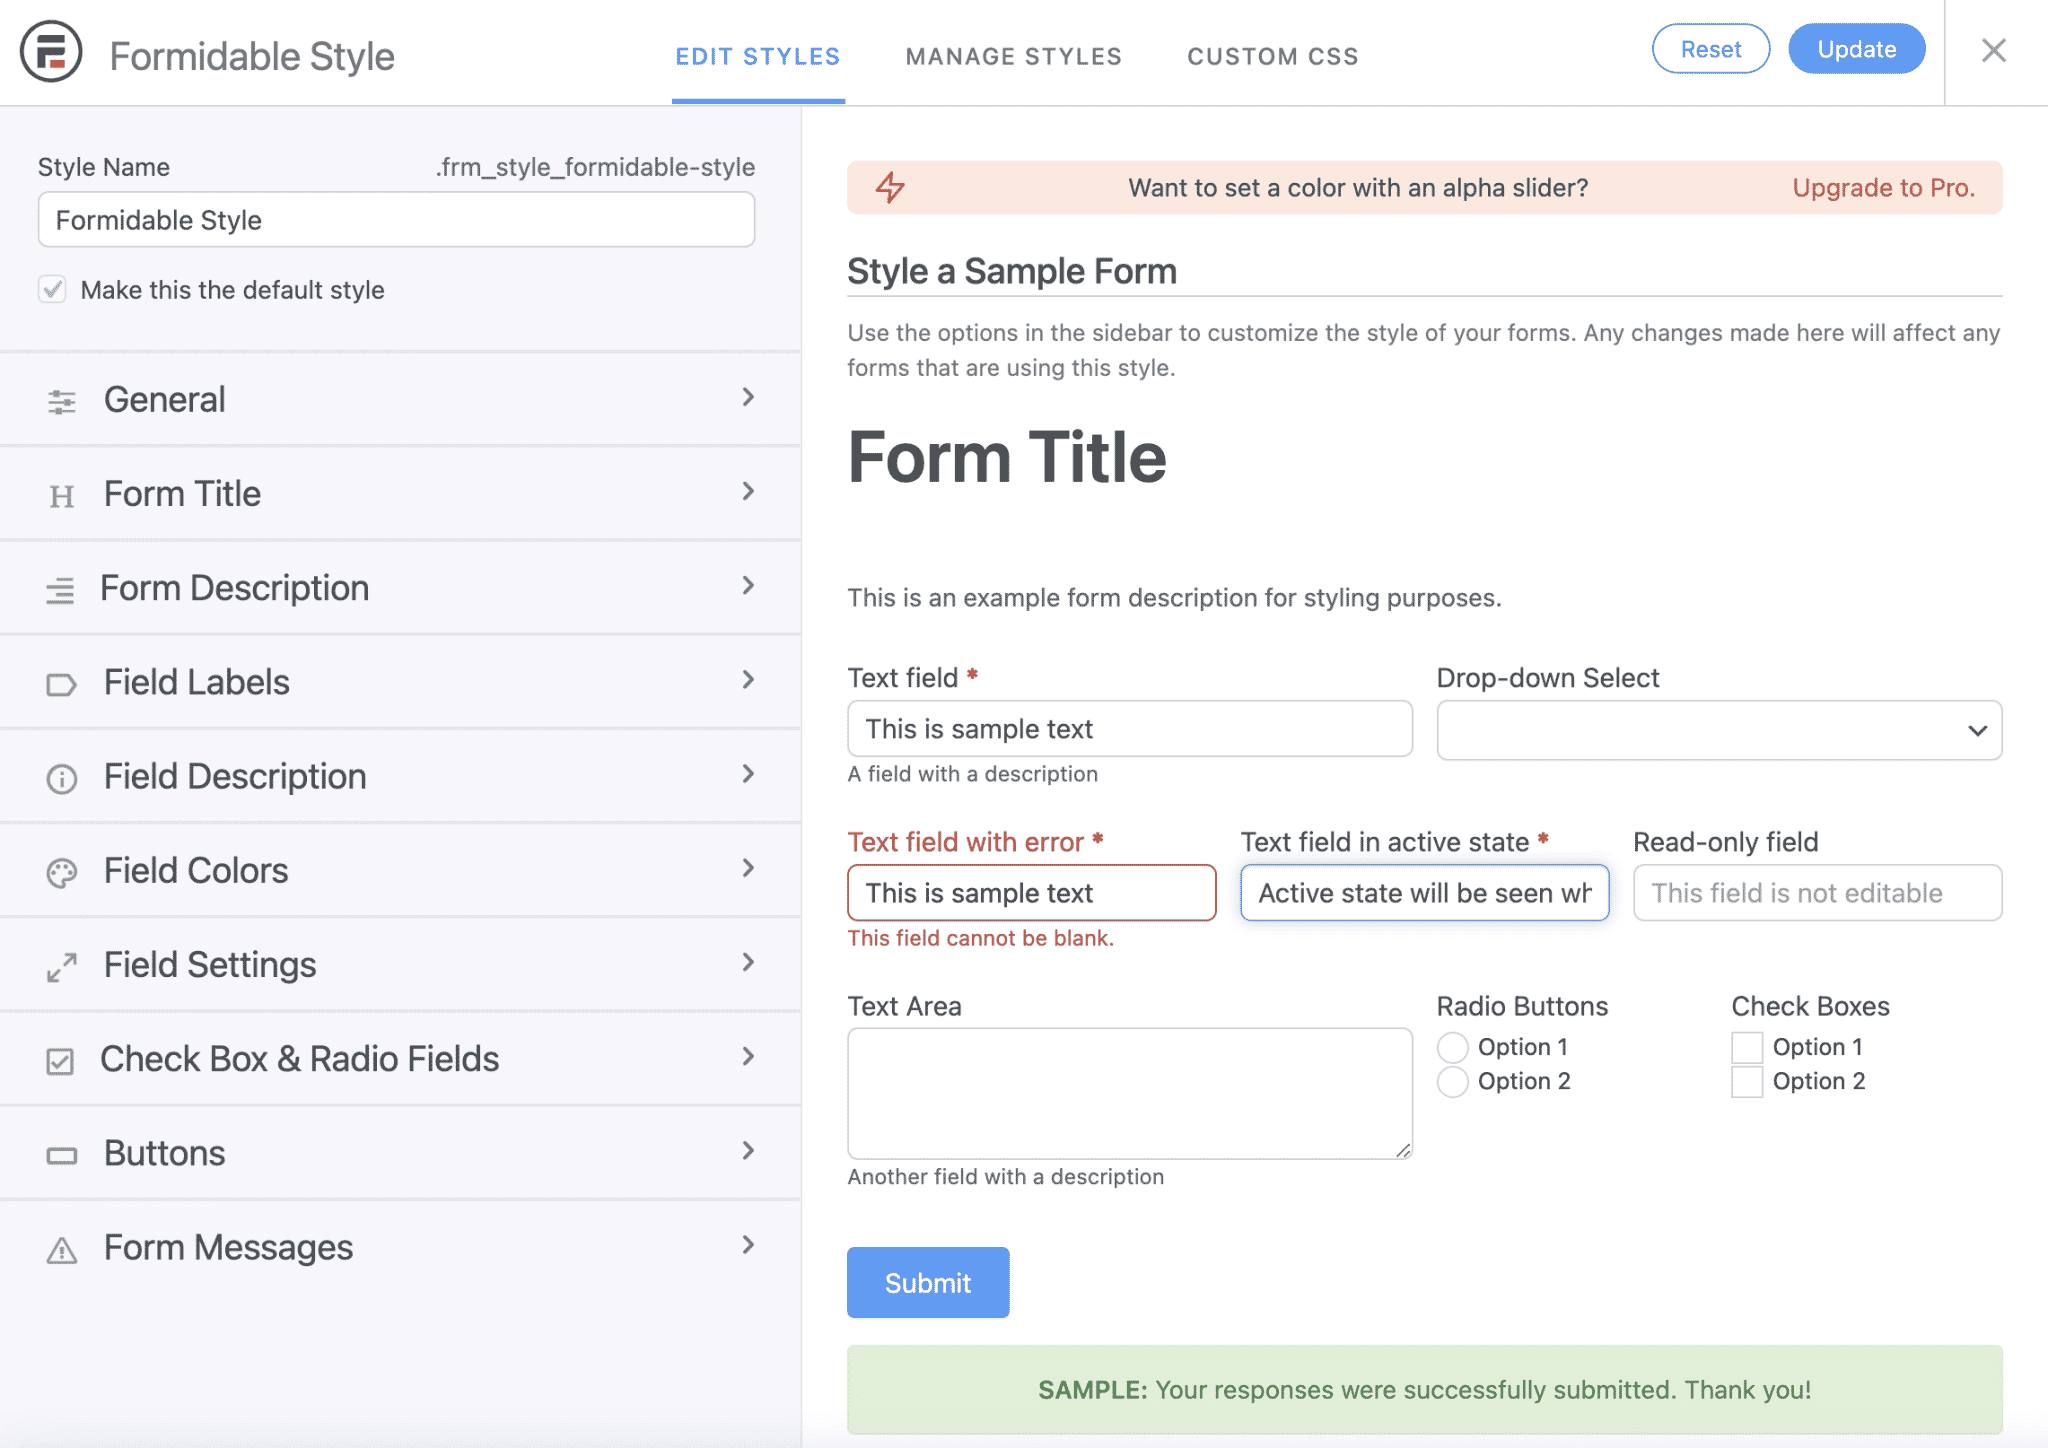 How to modify a form style on Formidable Forms.